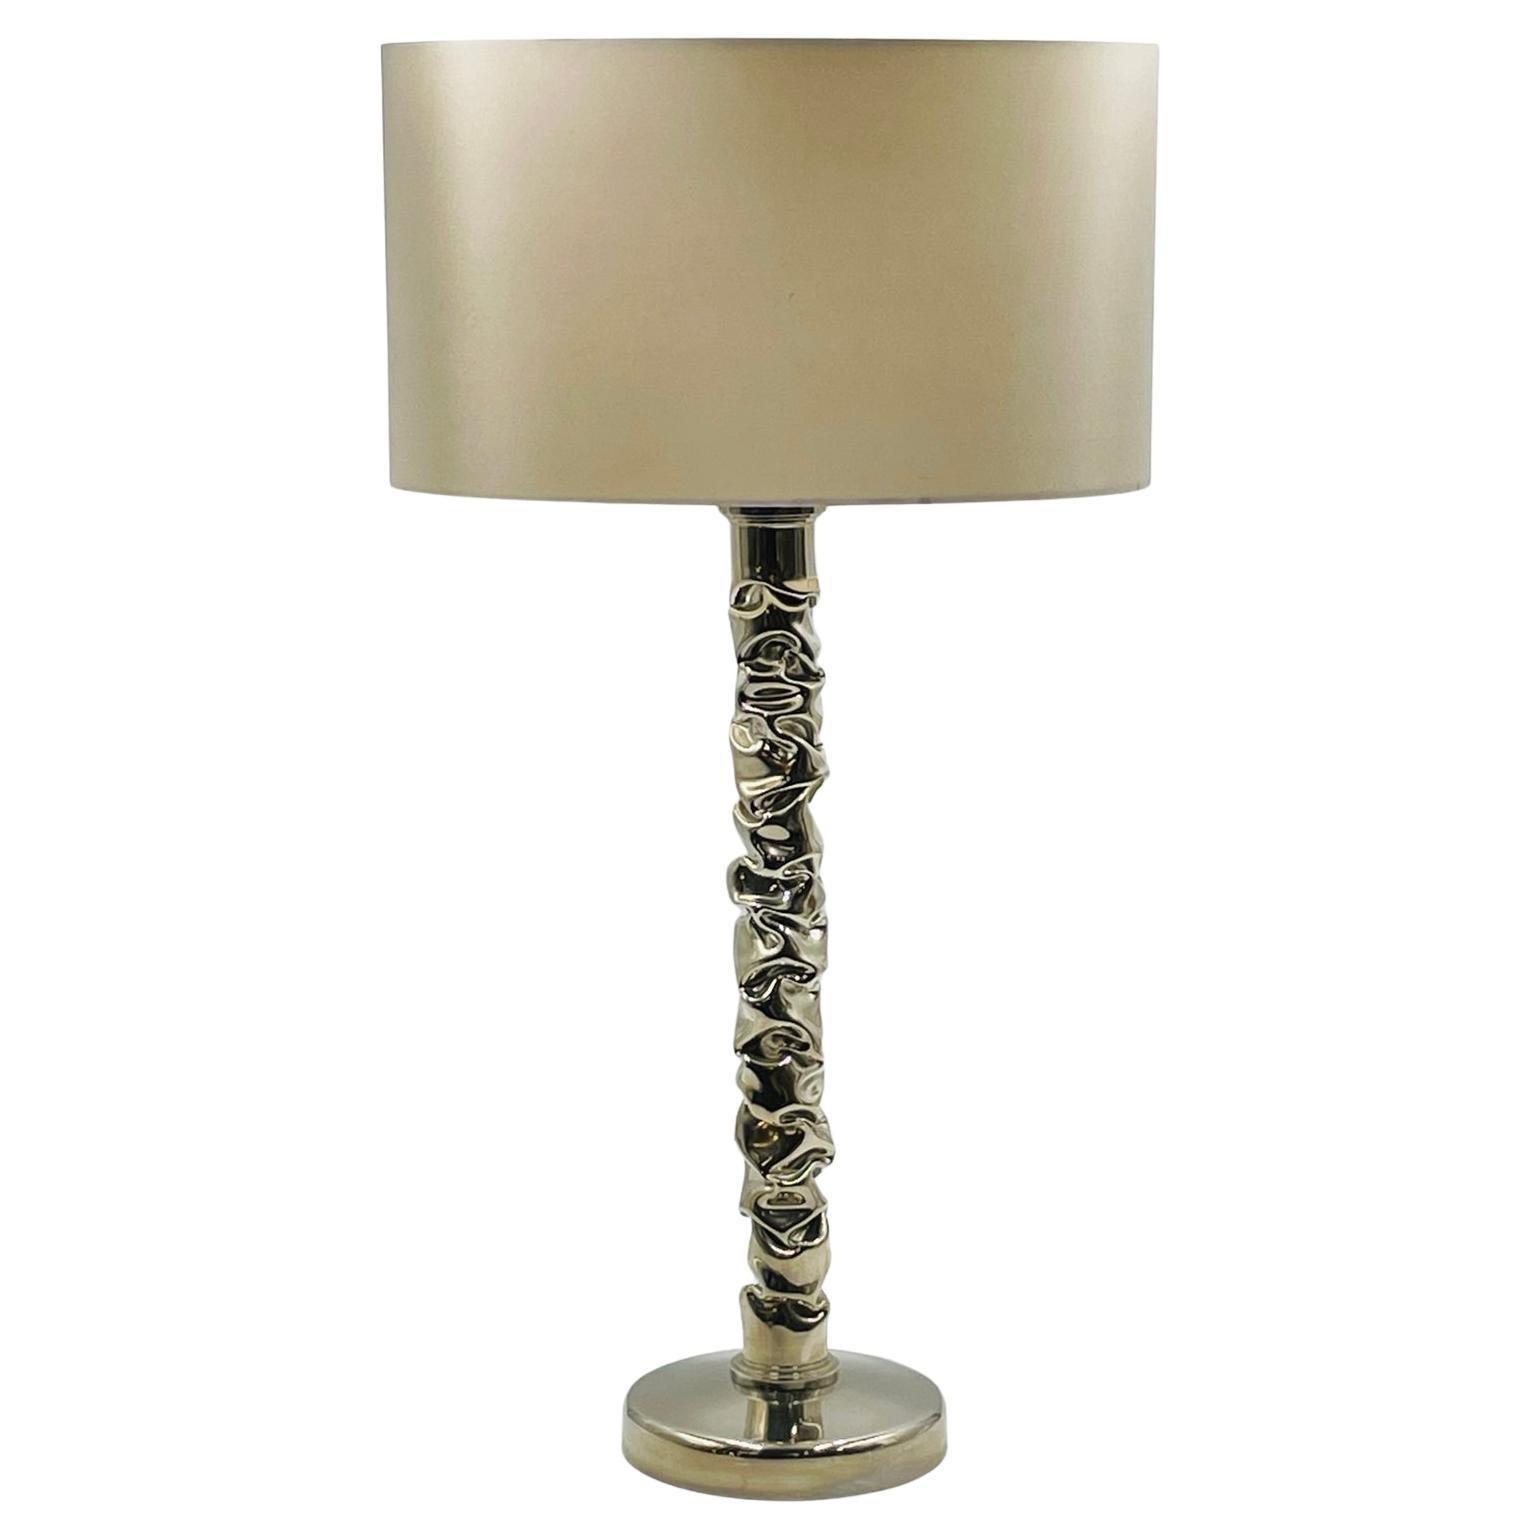 Stunning Table Lamp in Polished Nickel, Made in England by Porta Romana For Sale